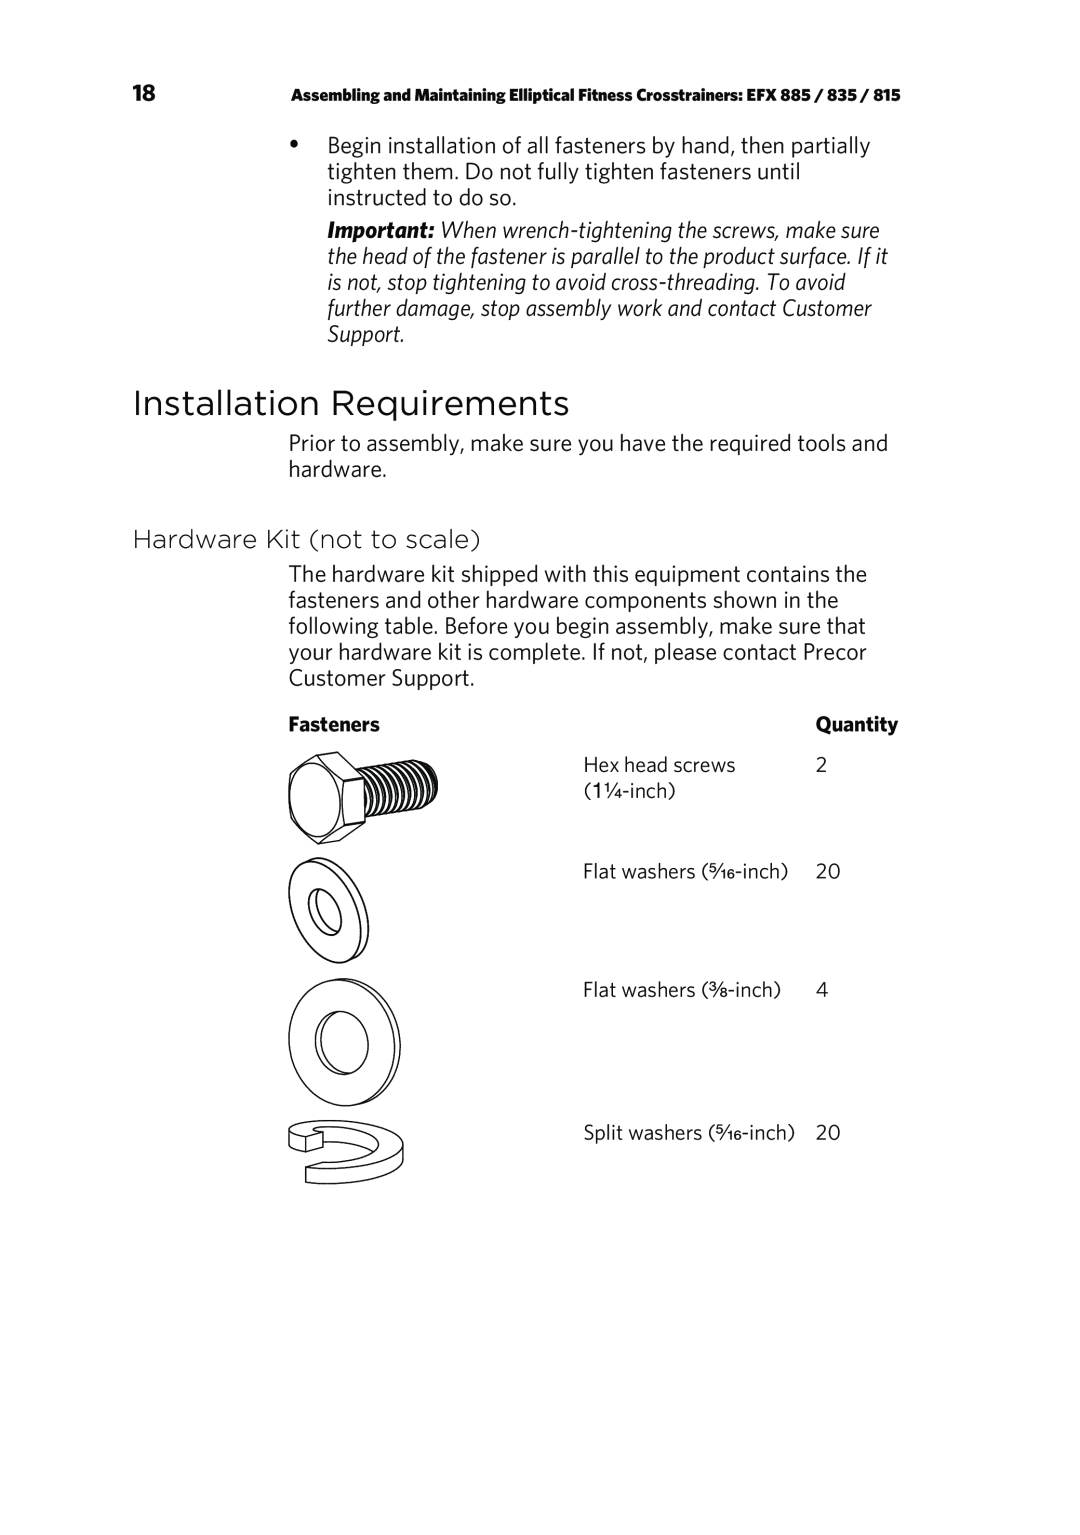 Precor P80 manual Installation Requirements, Hardware Kit not to scale 